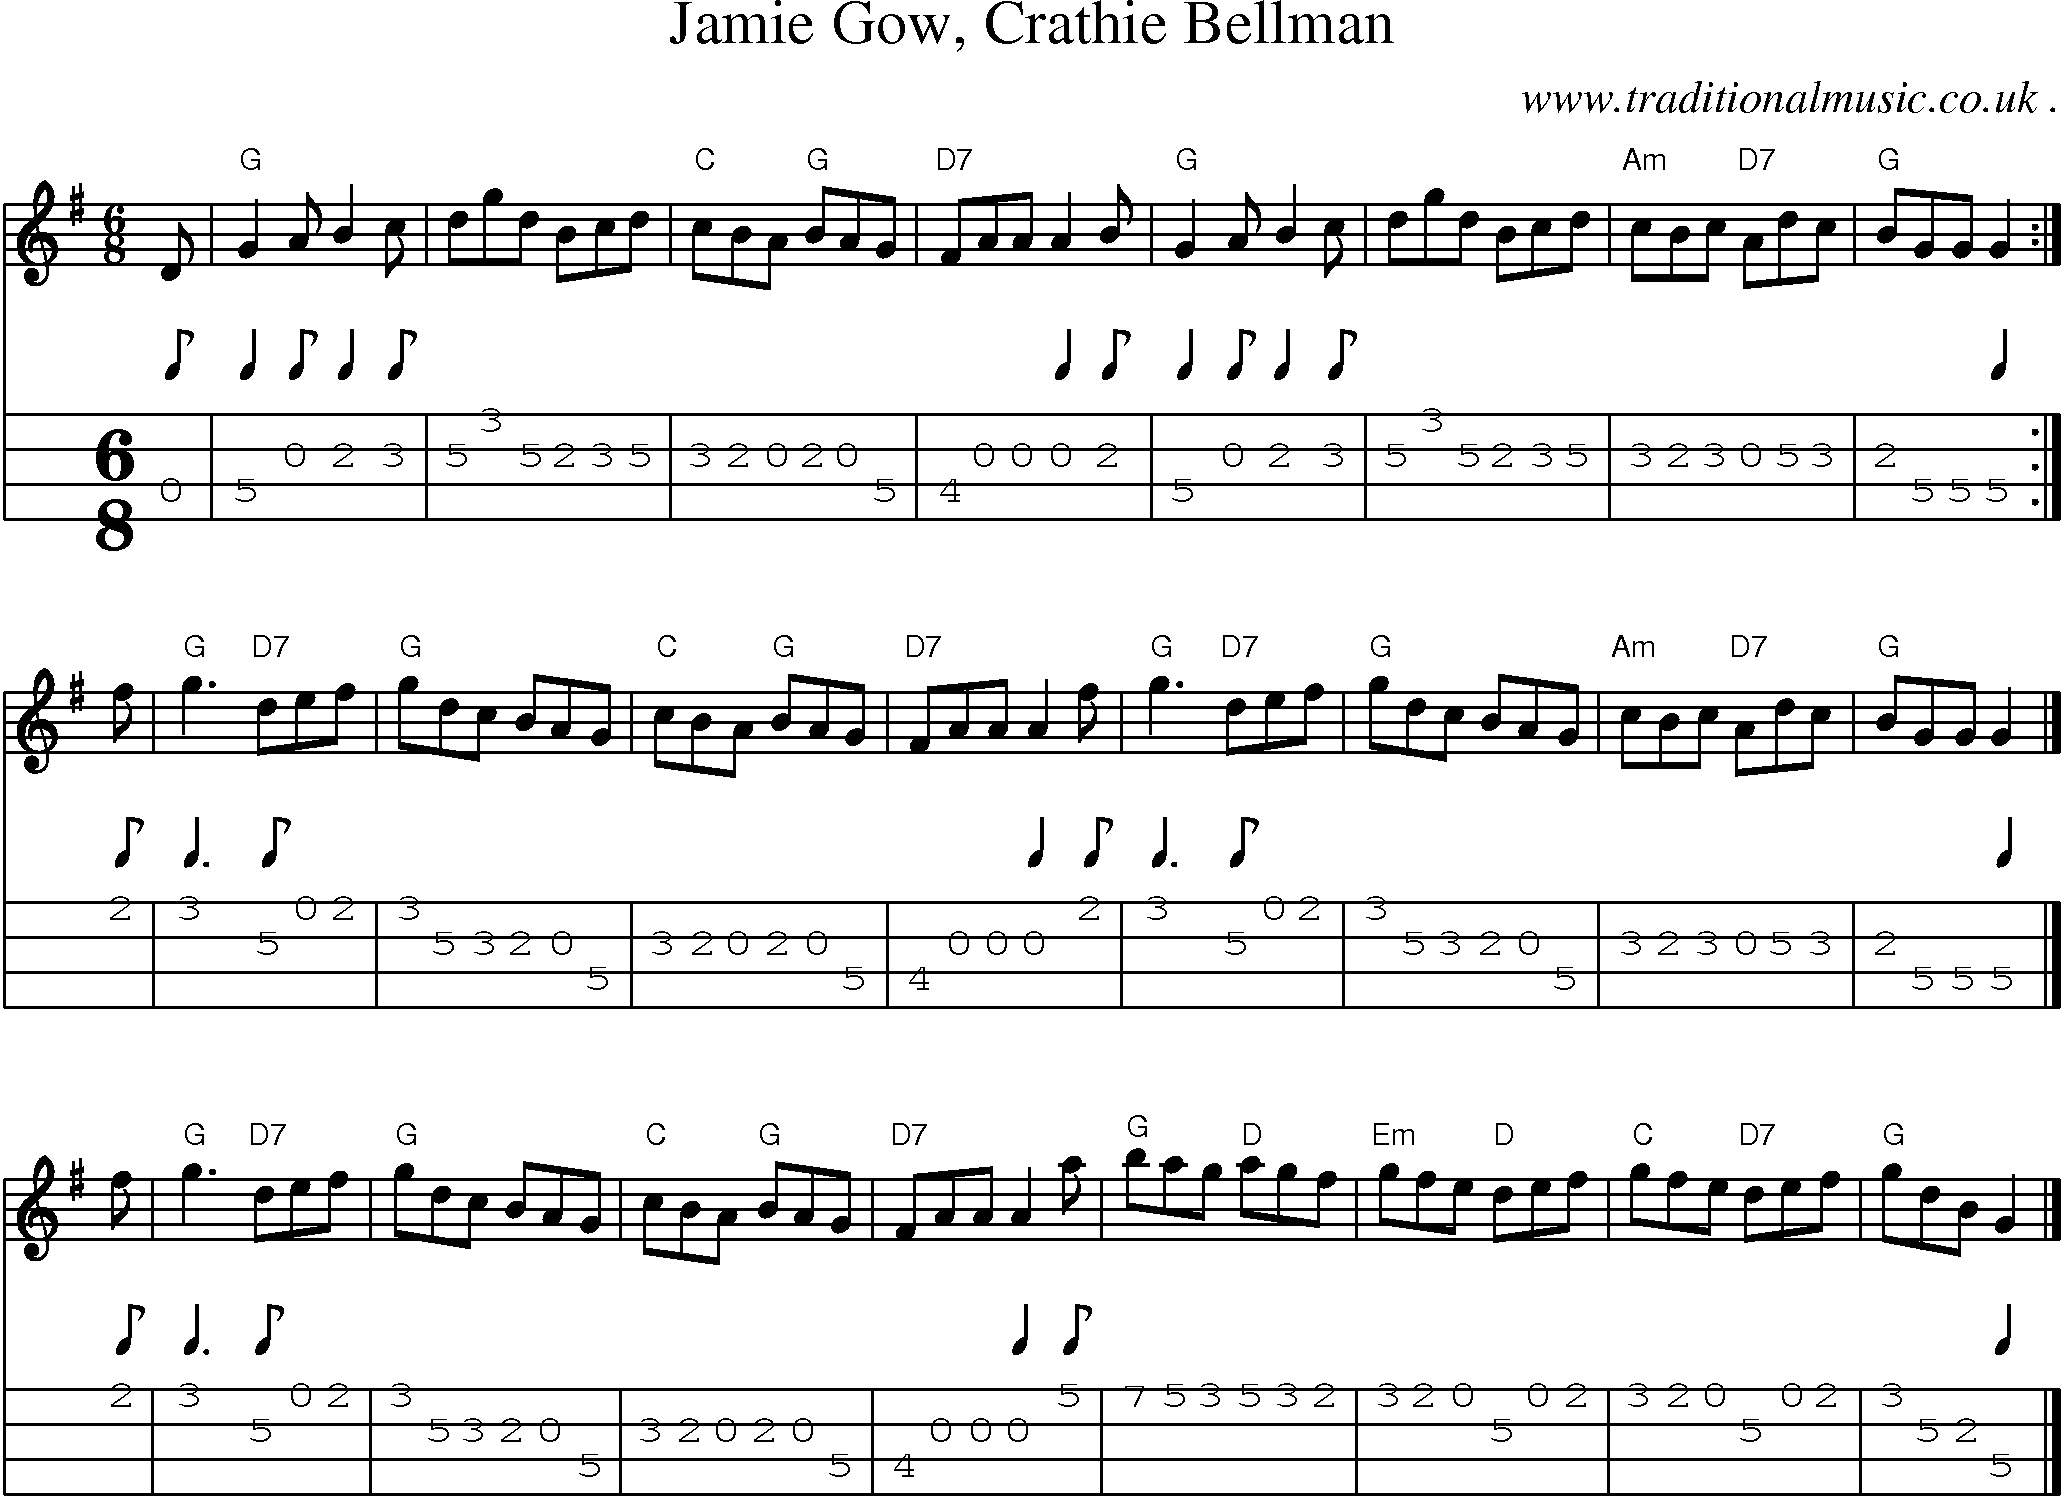 Sheet-music  score, Chords and Mandolin Tabs for Jamie Gow Crathie Bellman